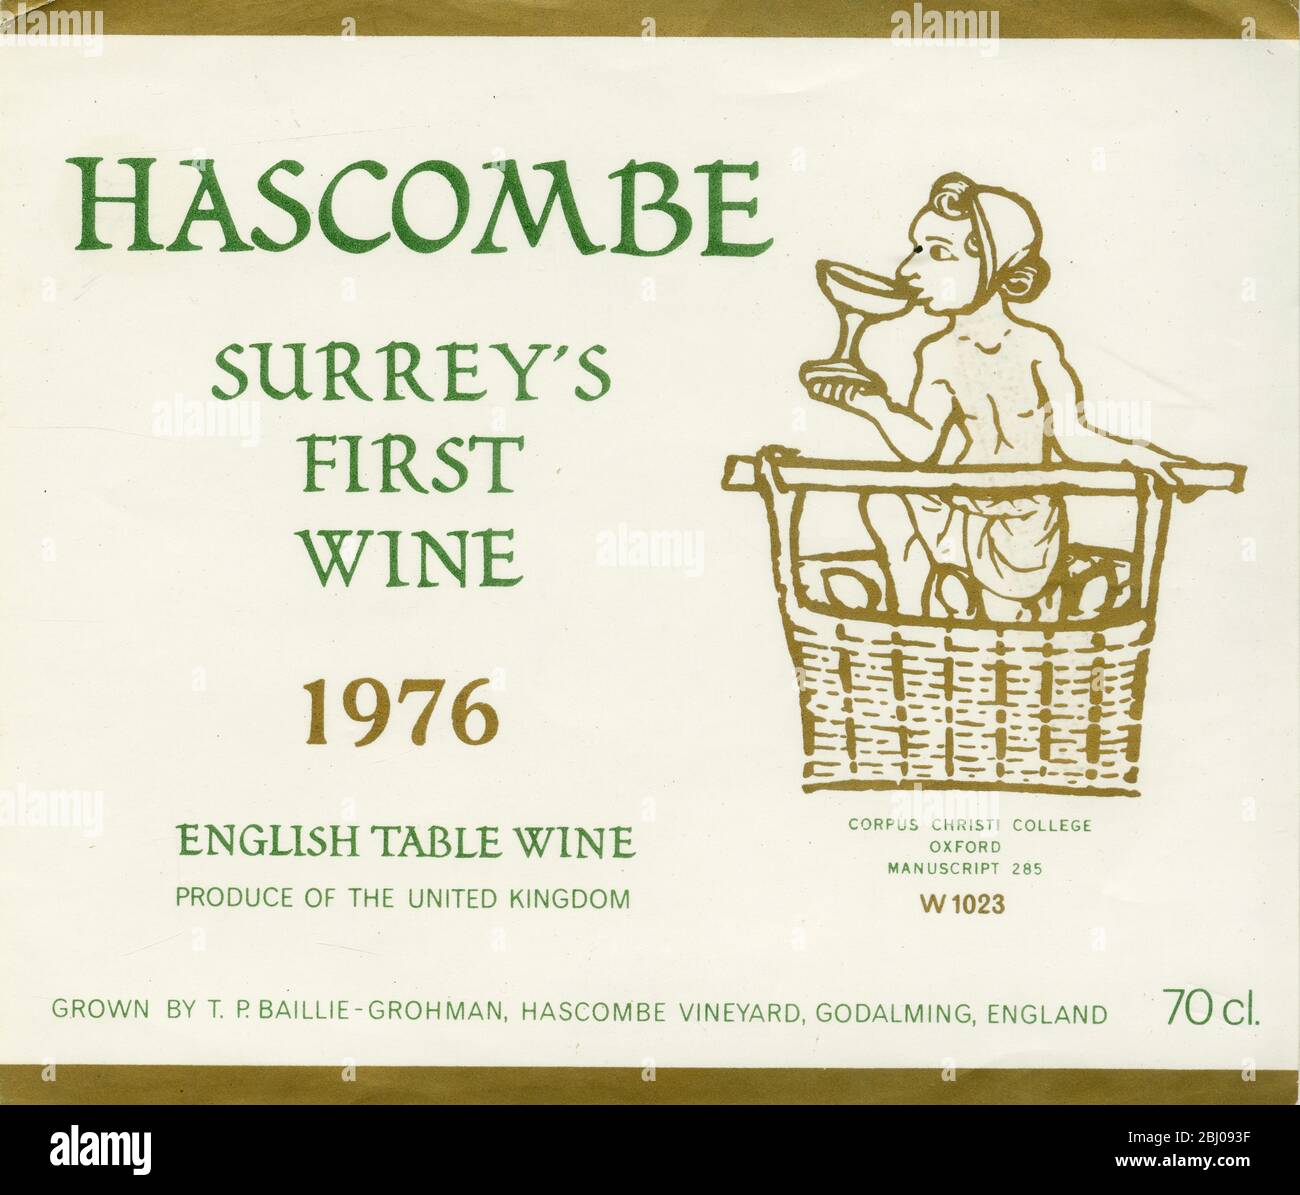 Wine Label. - Hascombe. Surrey's First Wine. 1976. English Table Wine. Grown by T.P.Baillie-Grohman, Hascombe Vineyard, Godalming, England. - Produce of the UK. Stock Photo